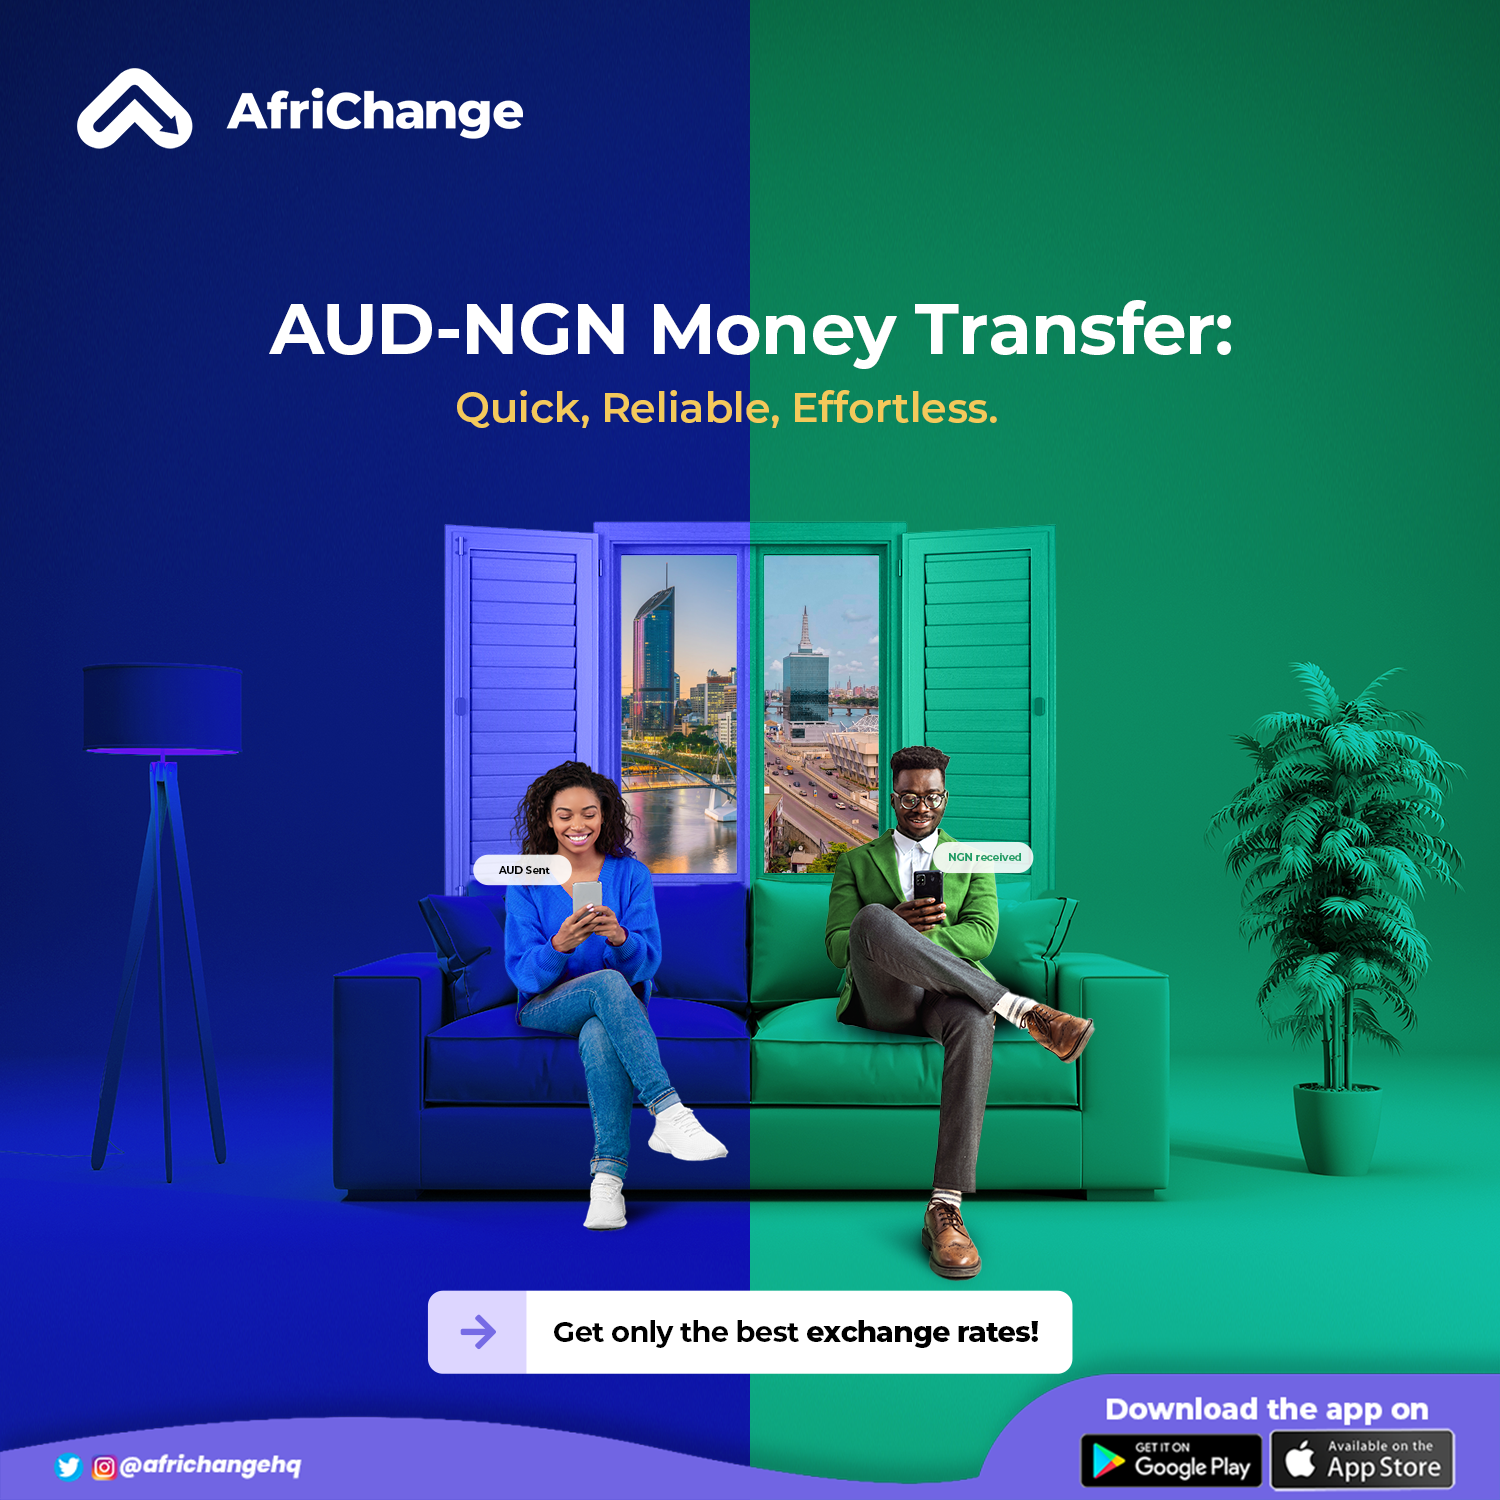 Send money from Australia to Nigeria in a quick, reliable and effortless way.